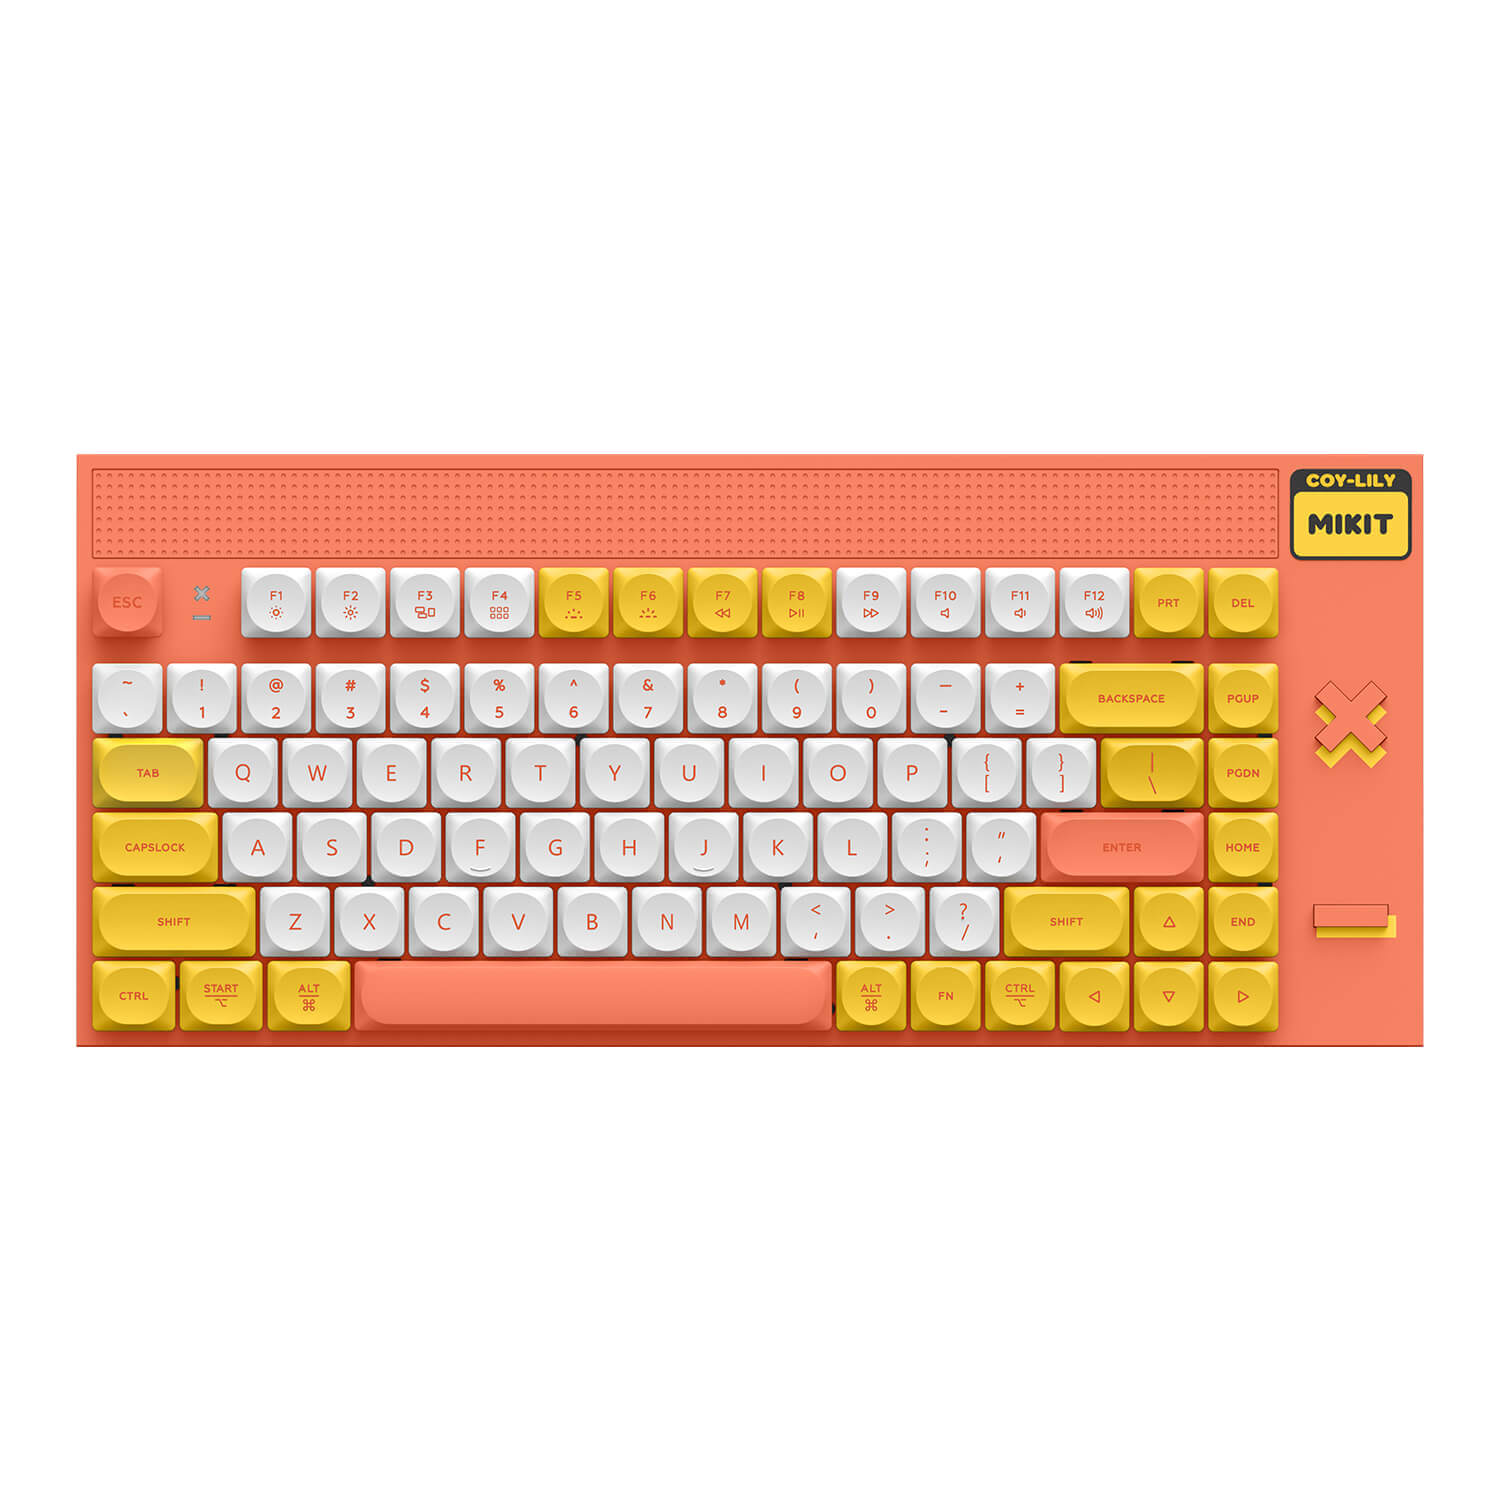 MIKIT CL80 Marmalade Low-profile Wireless Keyboard | macOS Compatible Fully